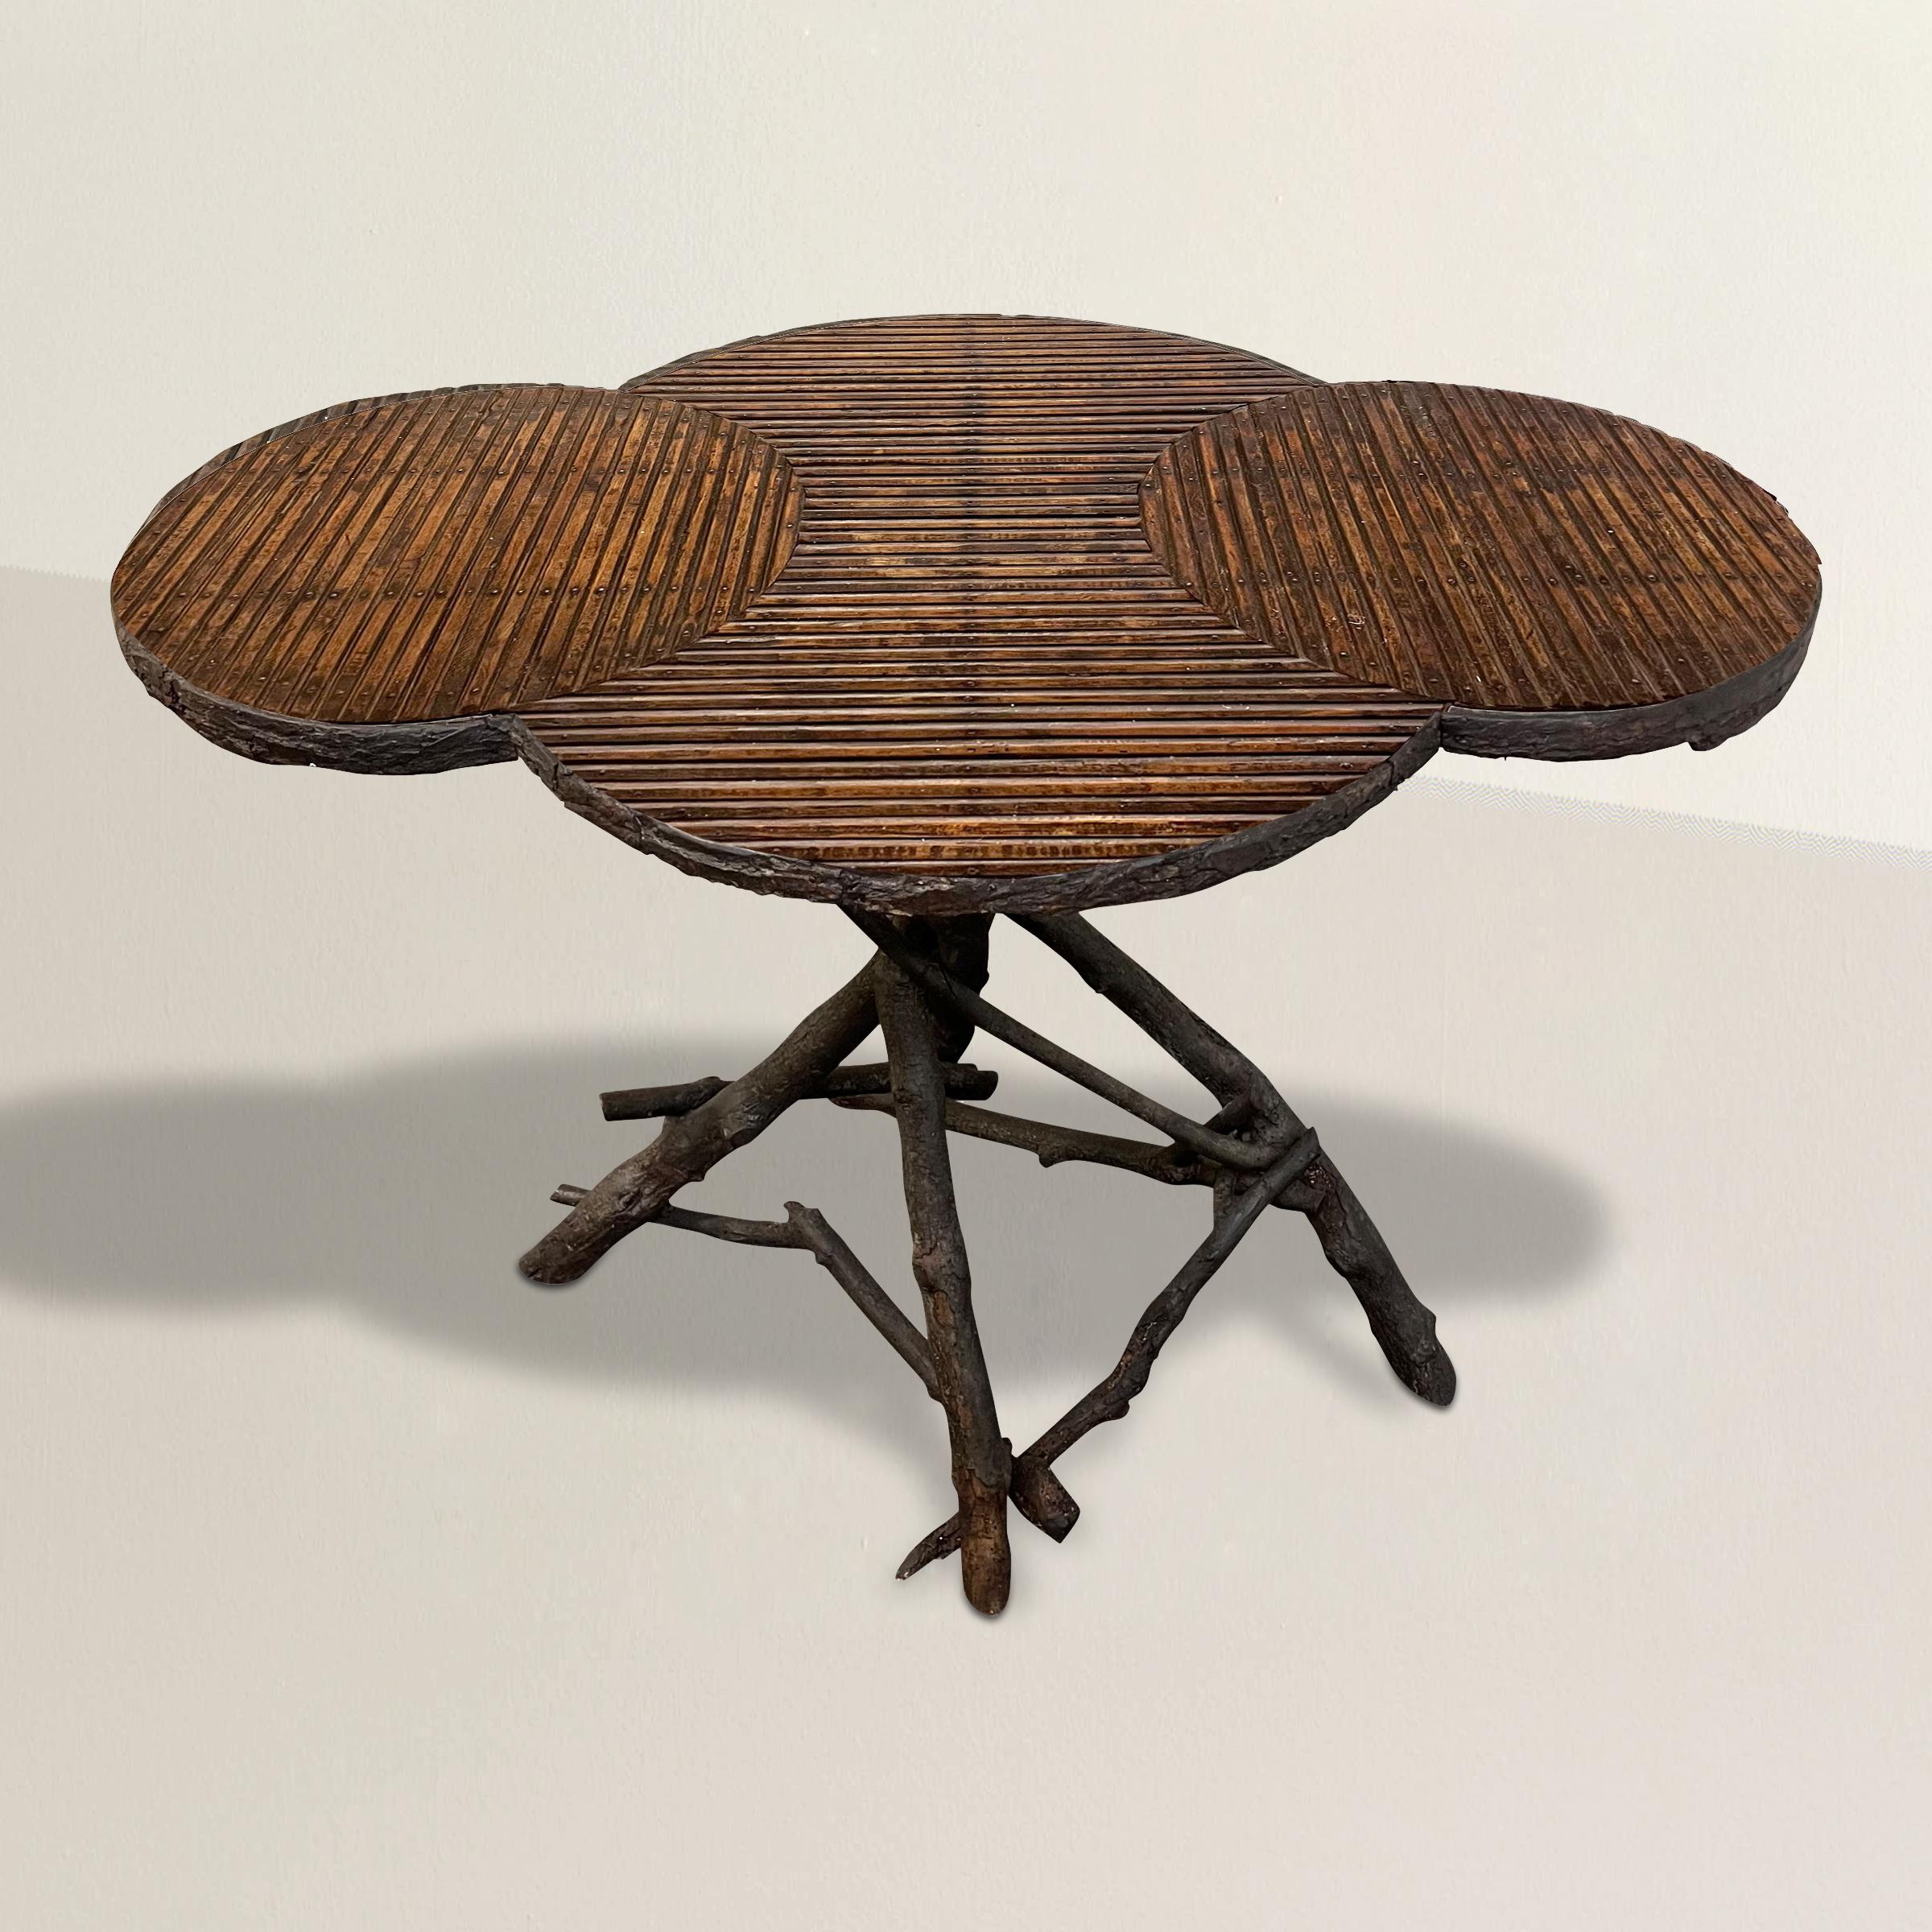 Transport yourself to the enchanting Tyrol region of Italy with this bespoke twig table, custom made for a mountain ski chalet in 1907. Crafted with meticulous artistry, this table captures the rustic beauty and natural allure of the Tyrolean